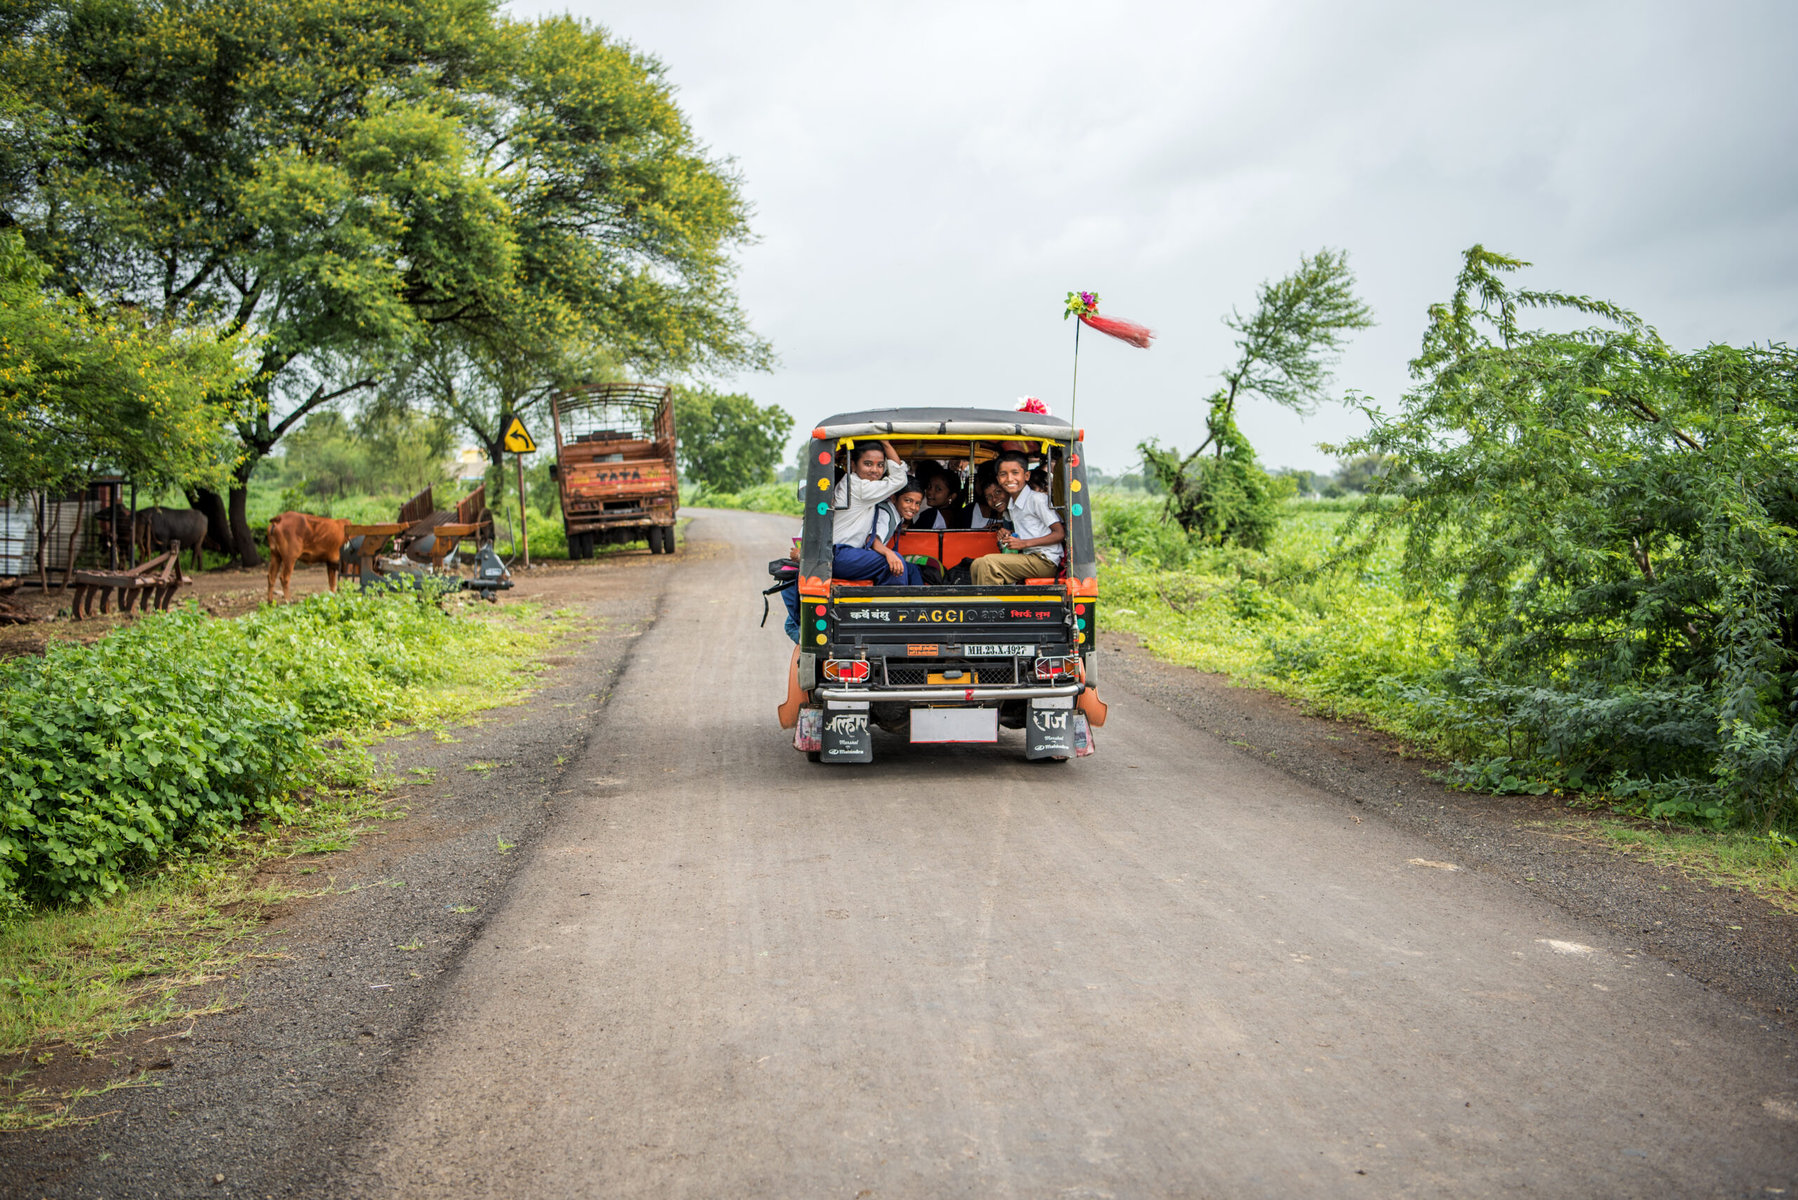 Children on their way to school in a rural village in Beed. They are in an open-air vehicle on a dirt road with green all around.